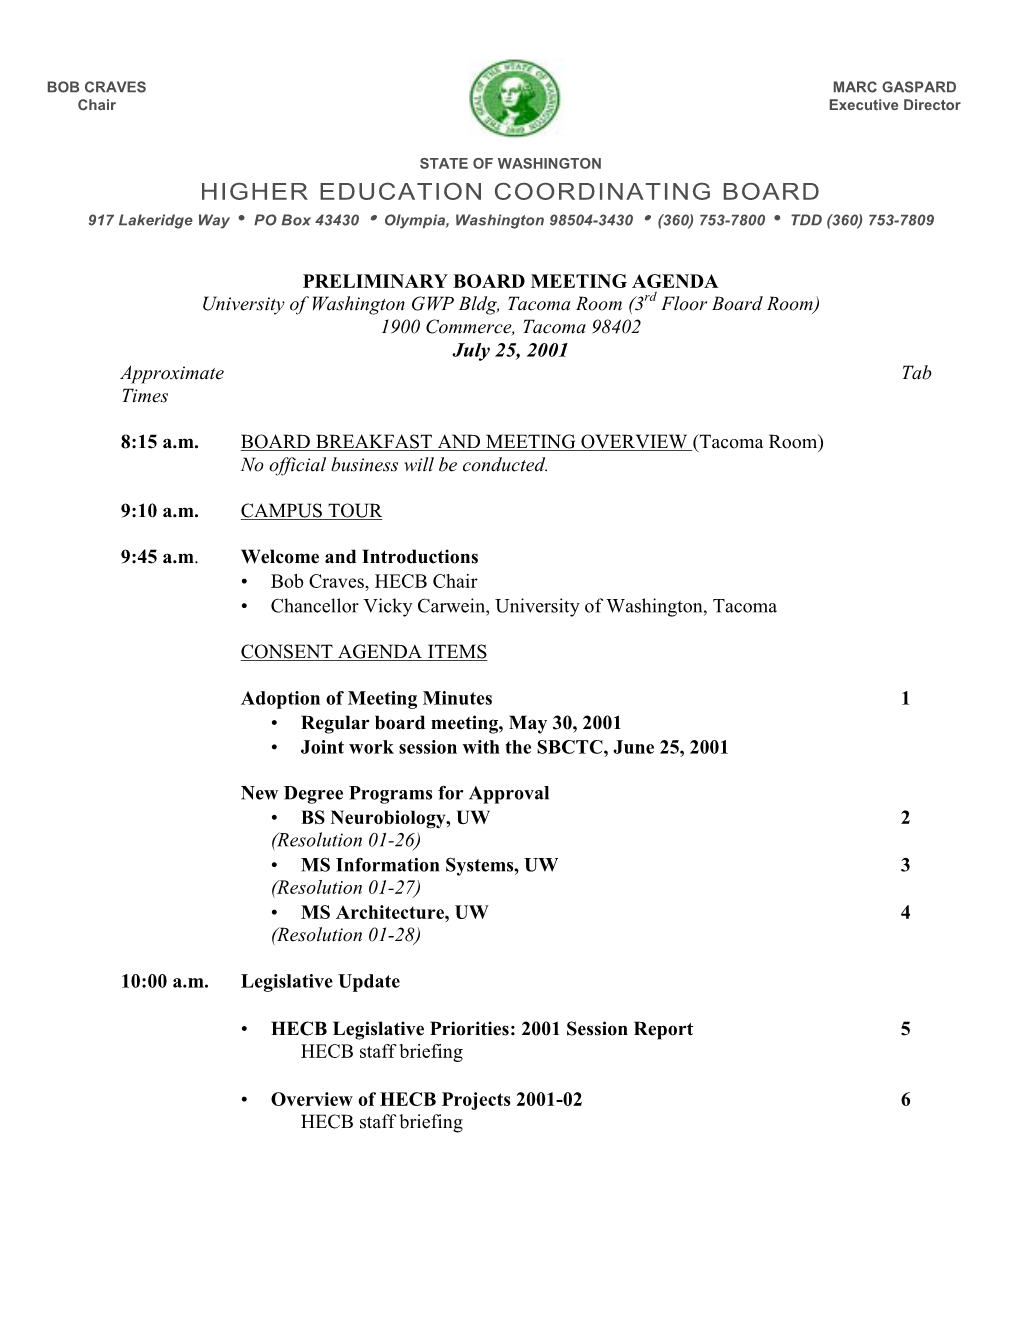 Higher Education Coordinating Board